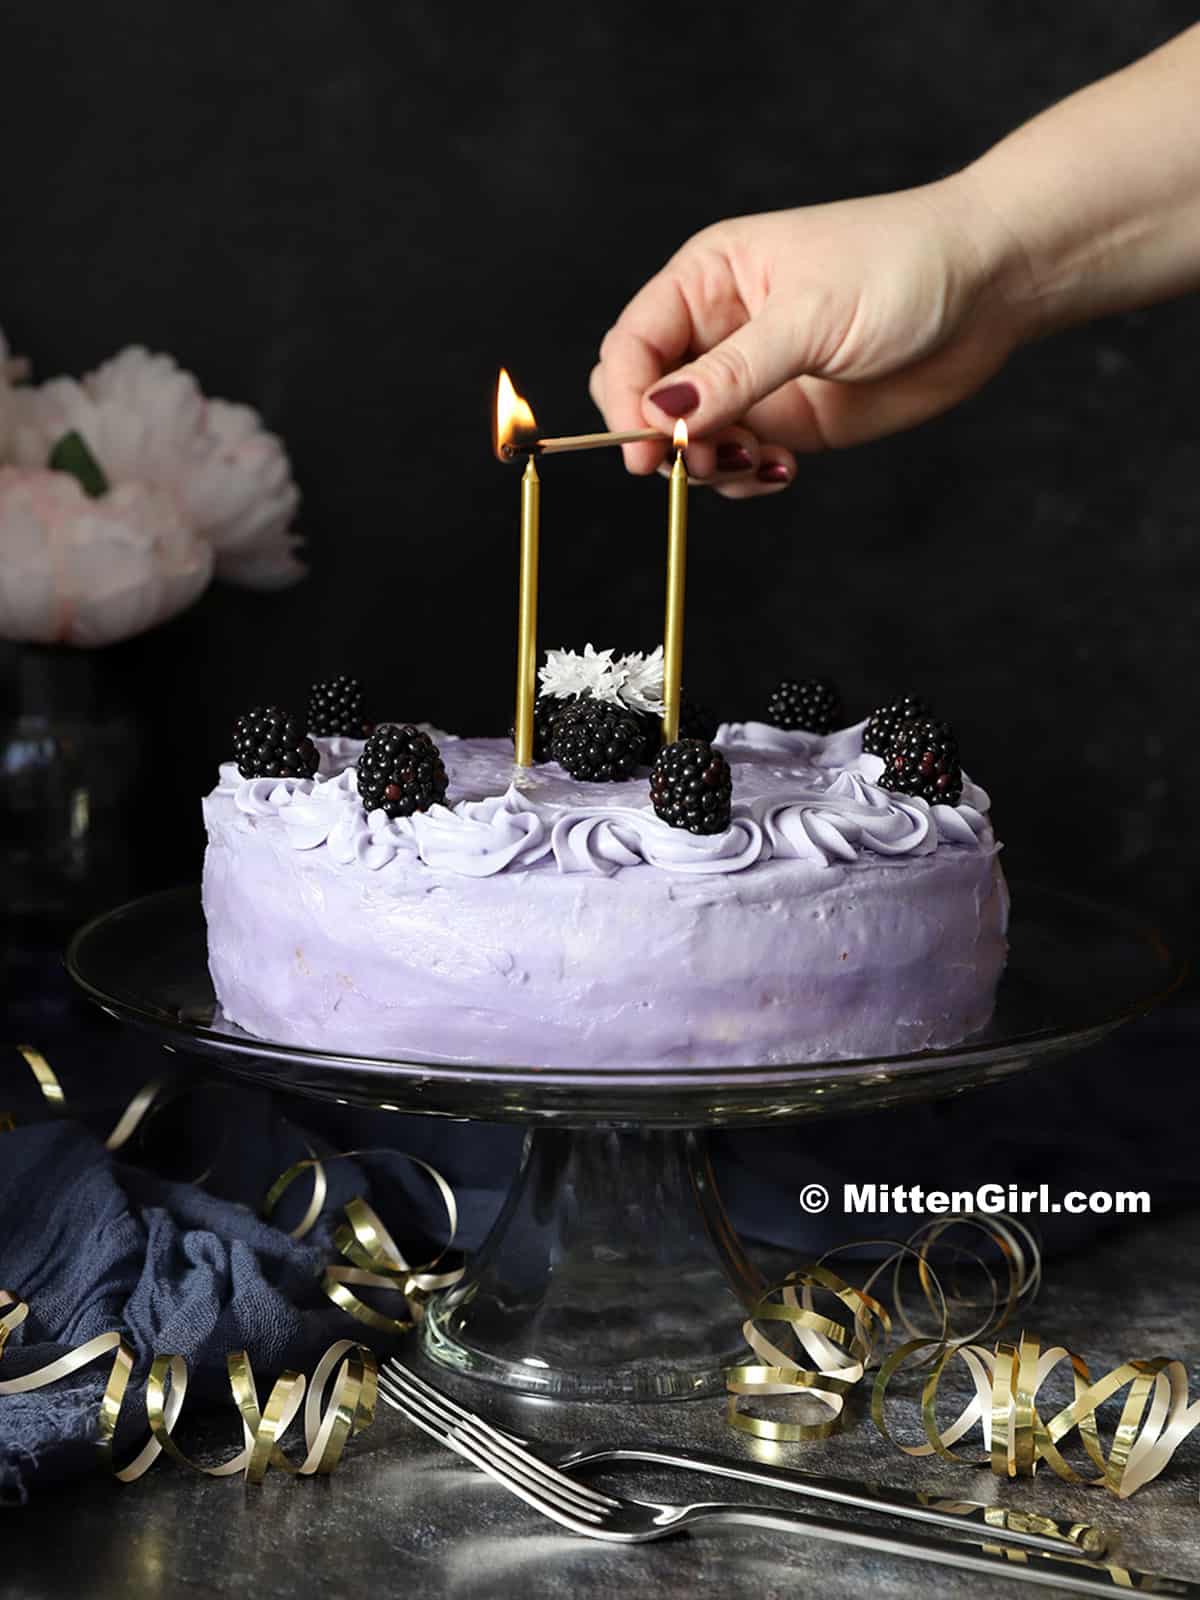 A hand lighting one of two candles on a purple cake.